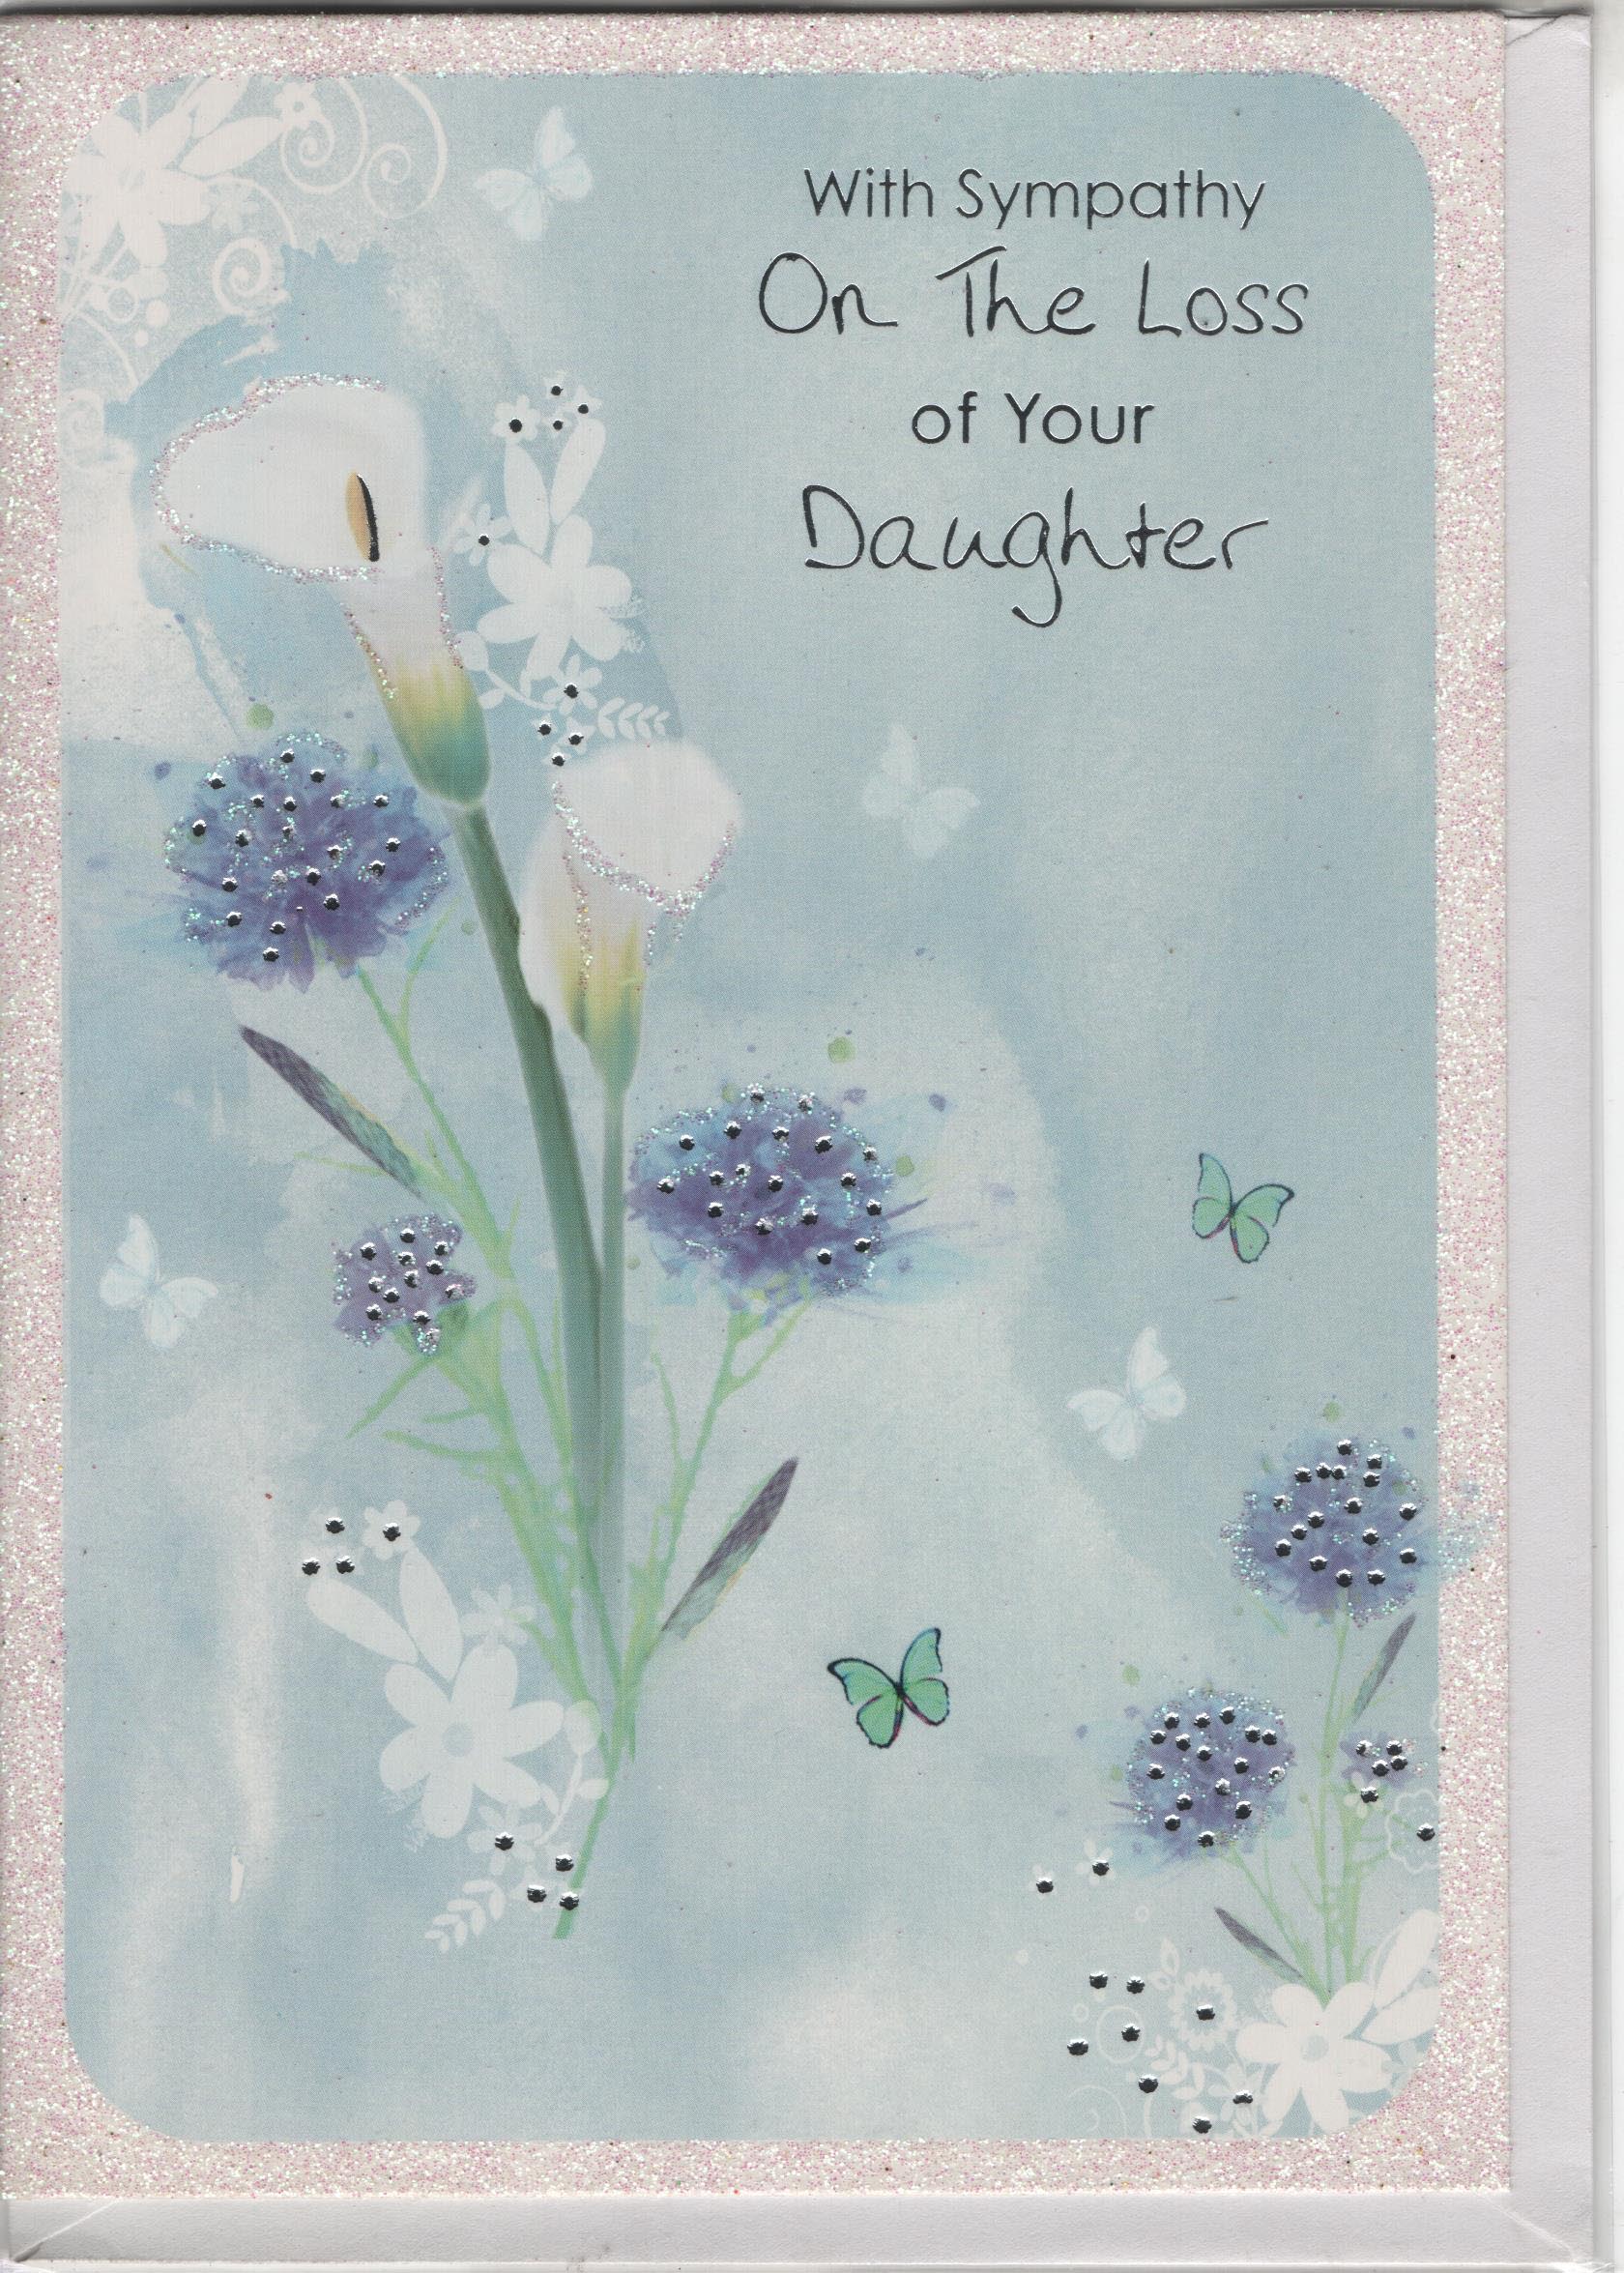 Iparty Greeting Card : With Sympathy On The Loss Of Your Daughter